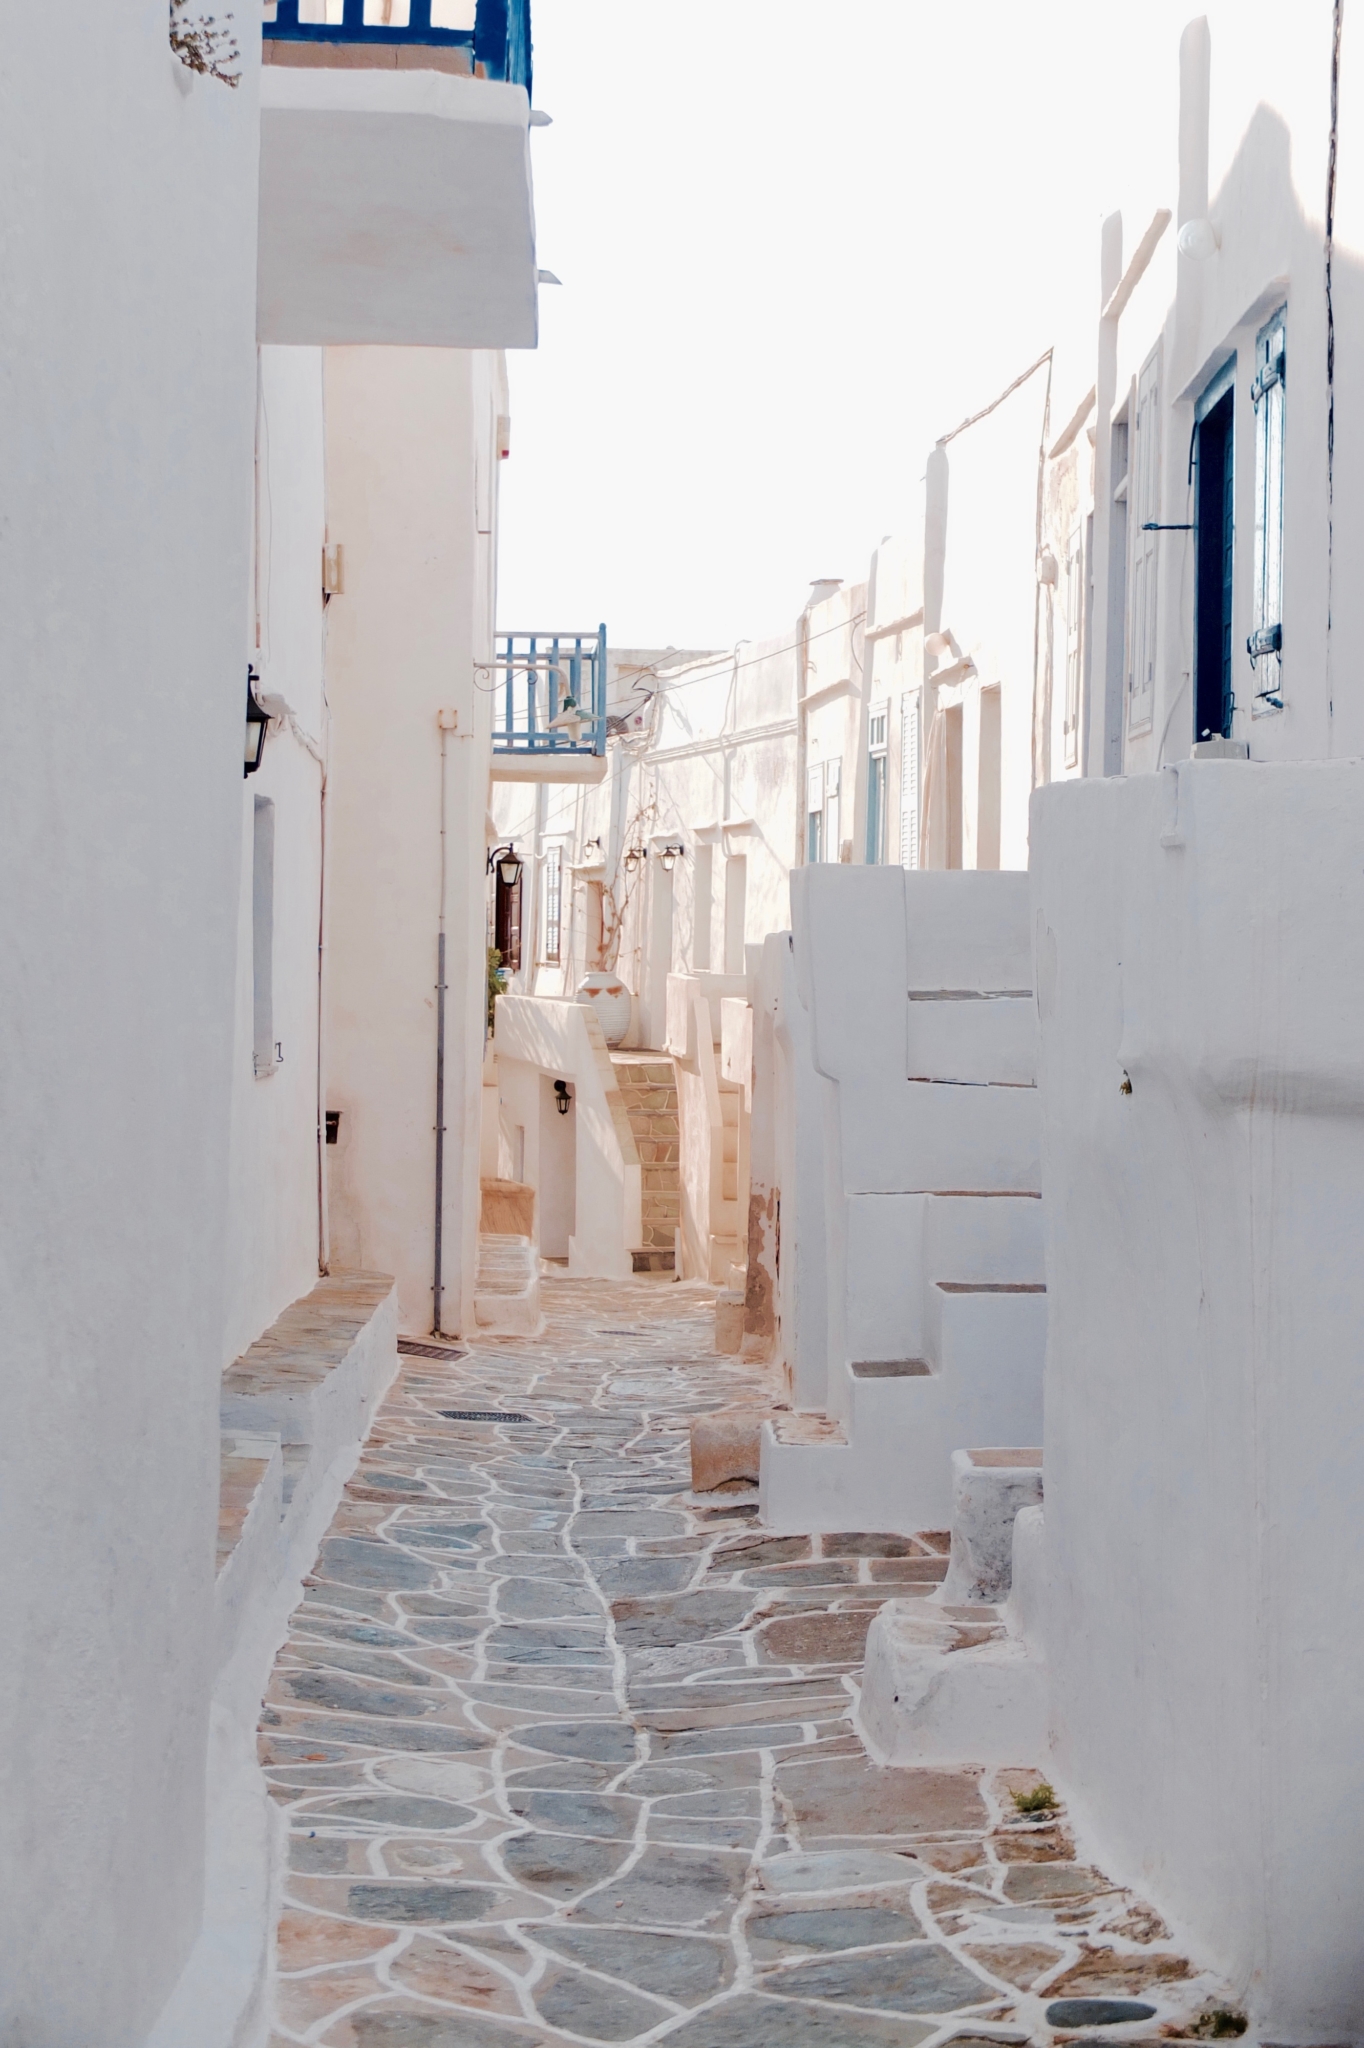 SAVE THE DATE: Join Us On Our Food, Writing, Photography & Creative Escape To The Greek Islands This September